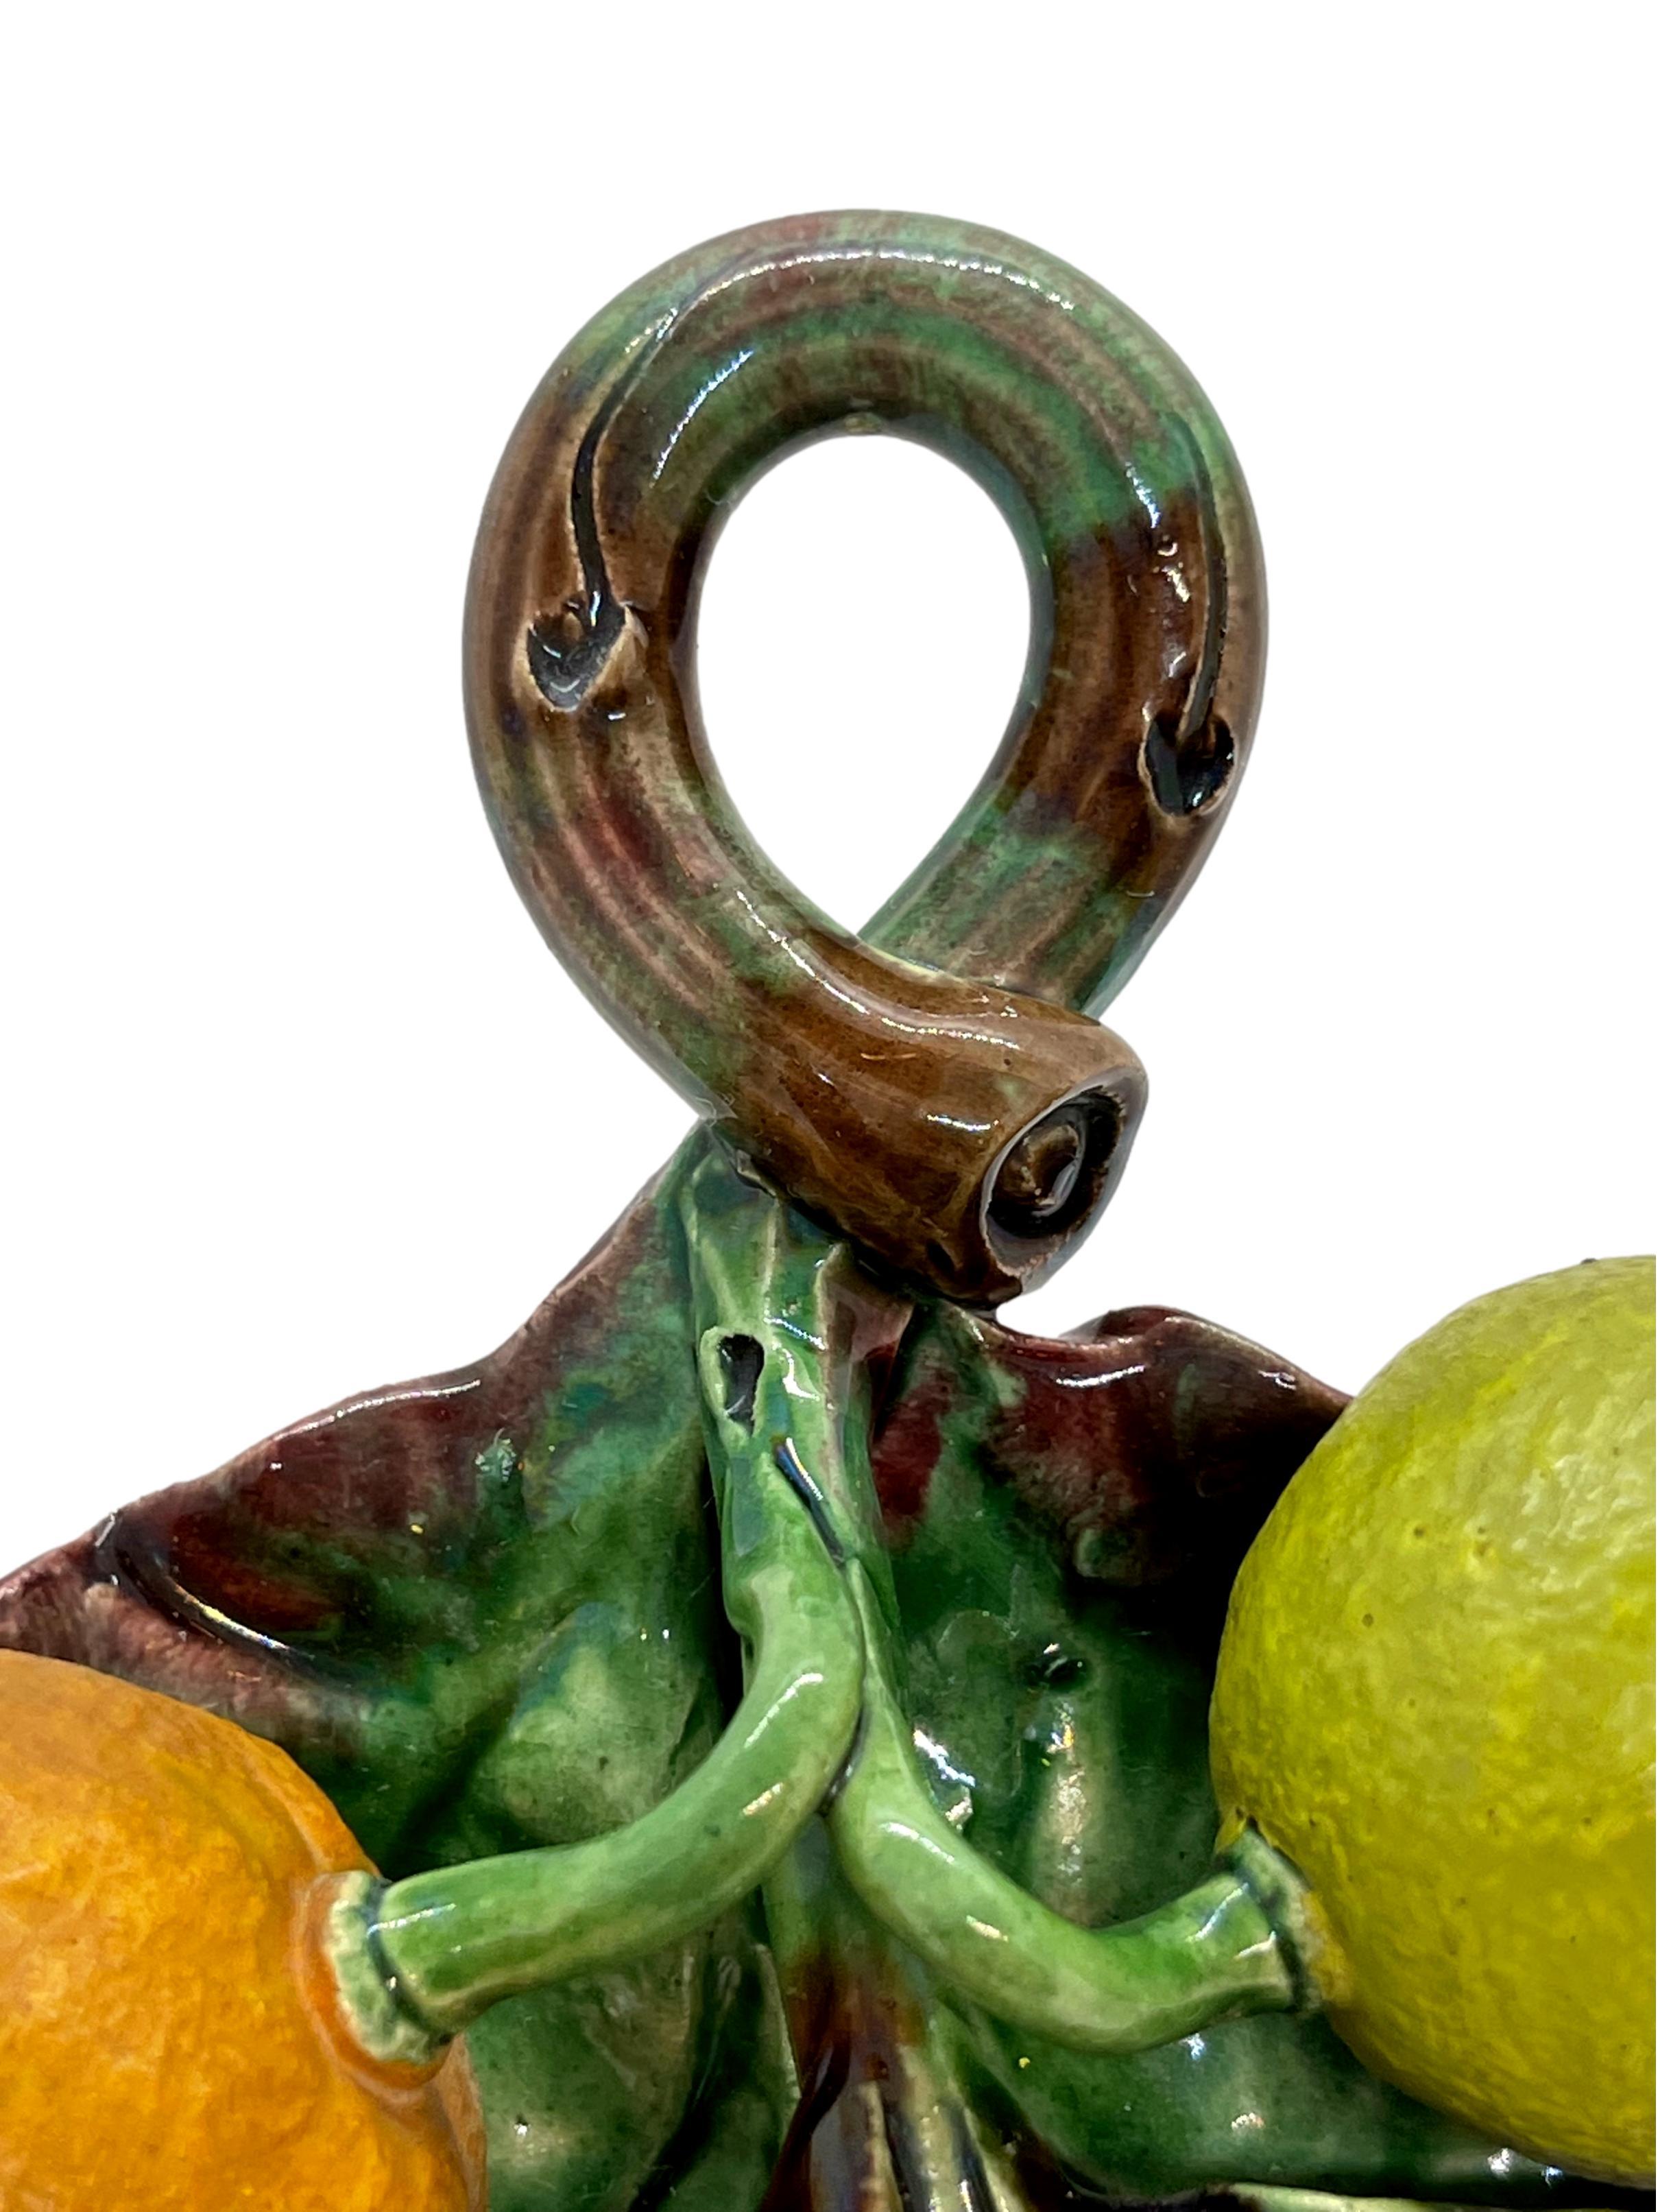 19th Century French Majolica Trompe L'oeil Wall Plaque with Oranges, Perret-Gentil, Menton For Sale